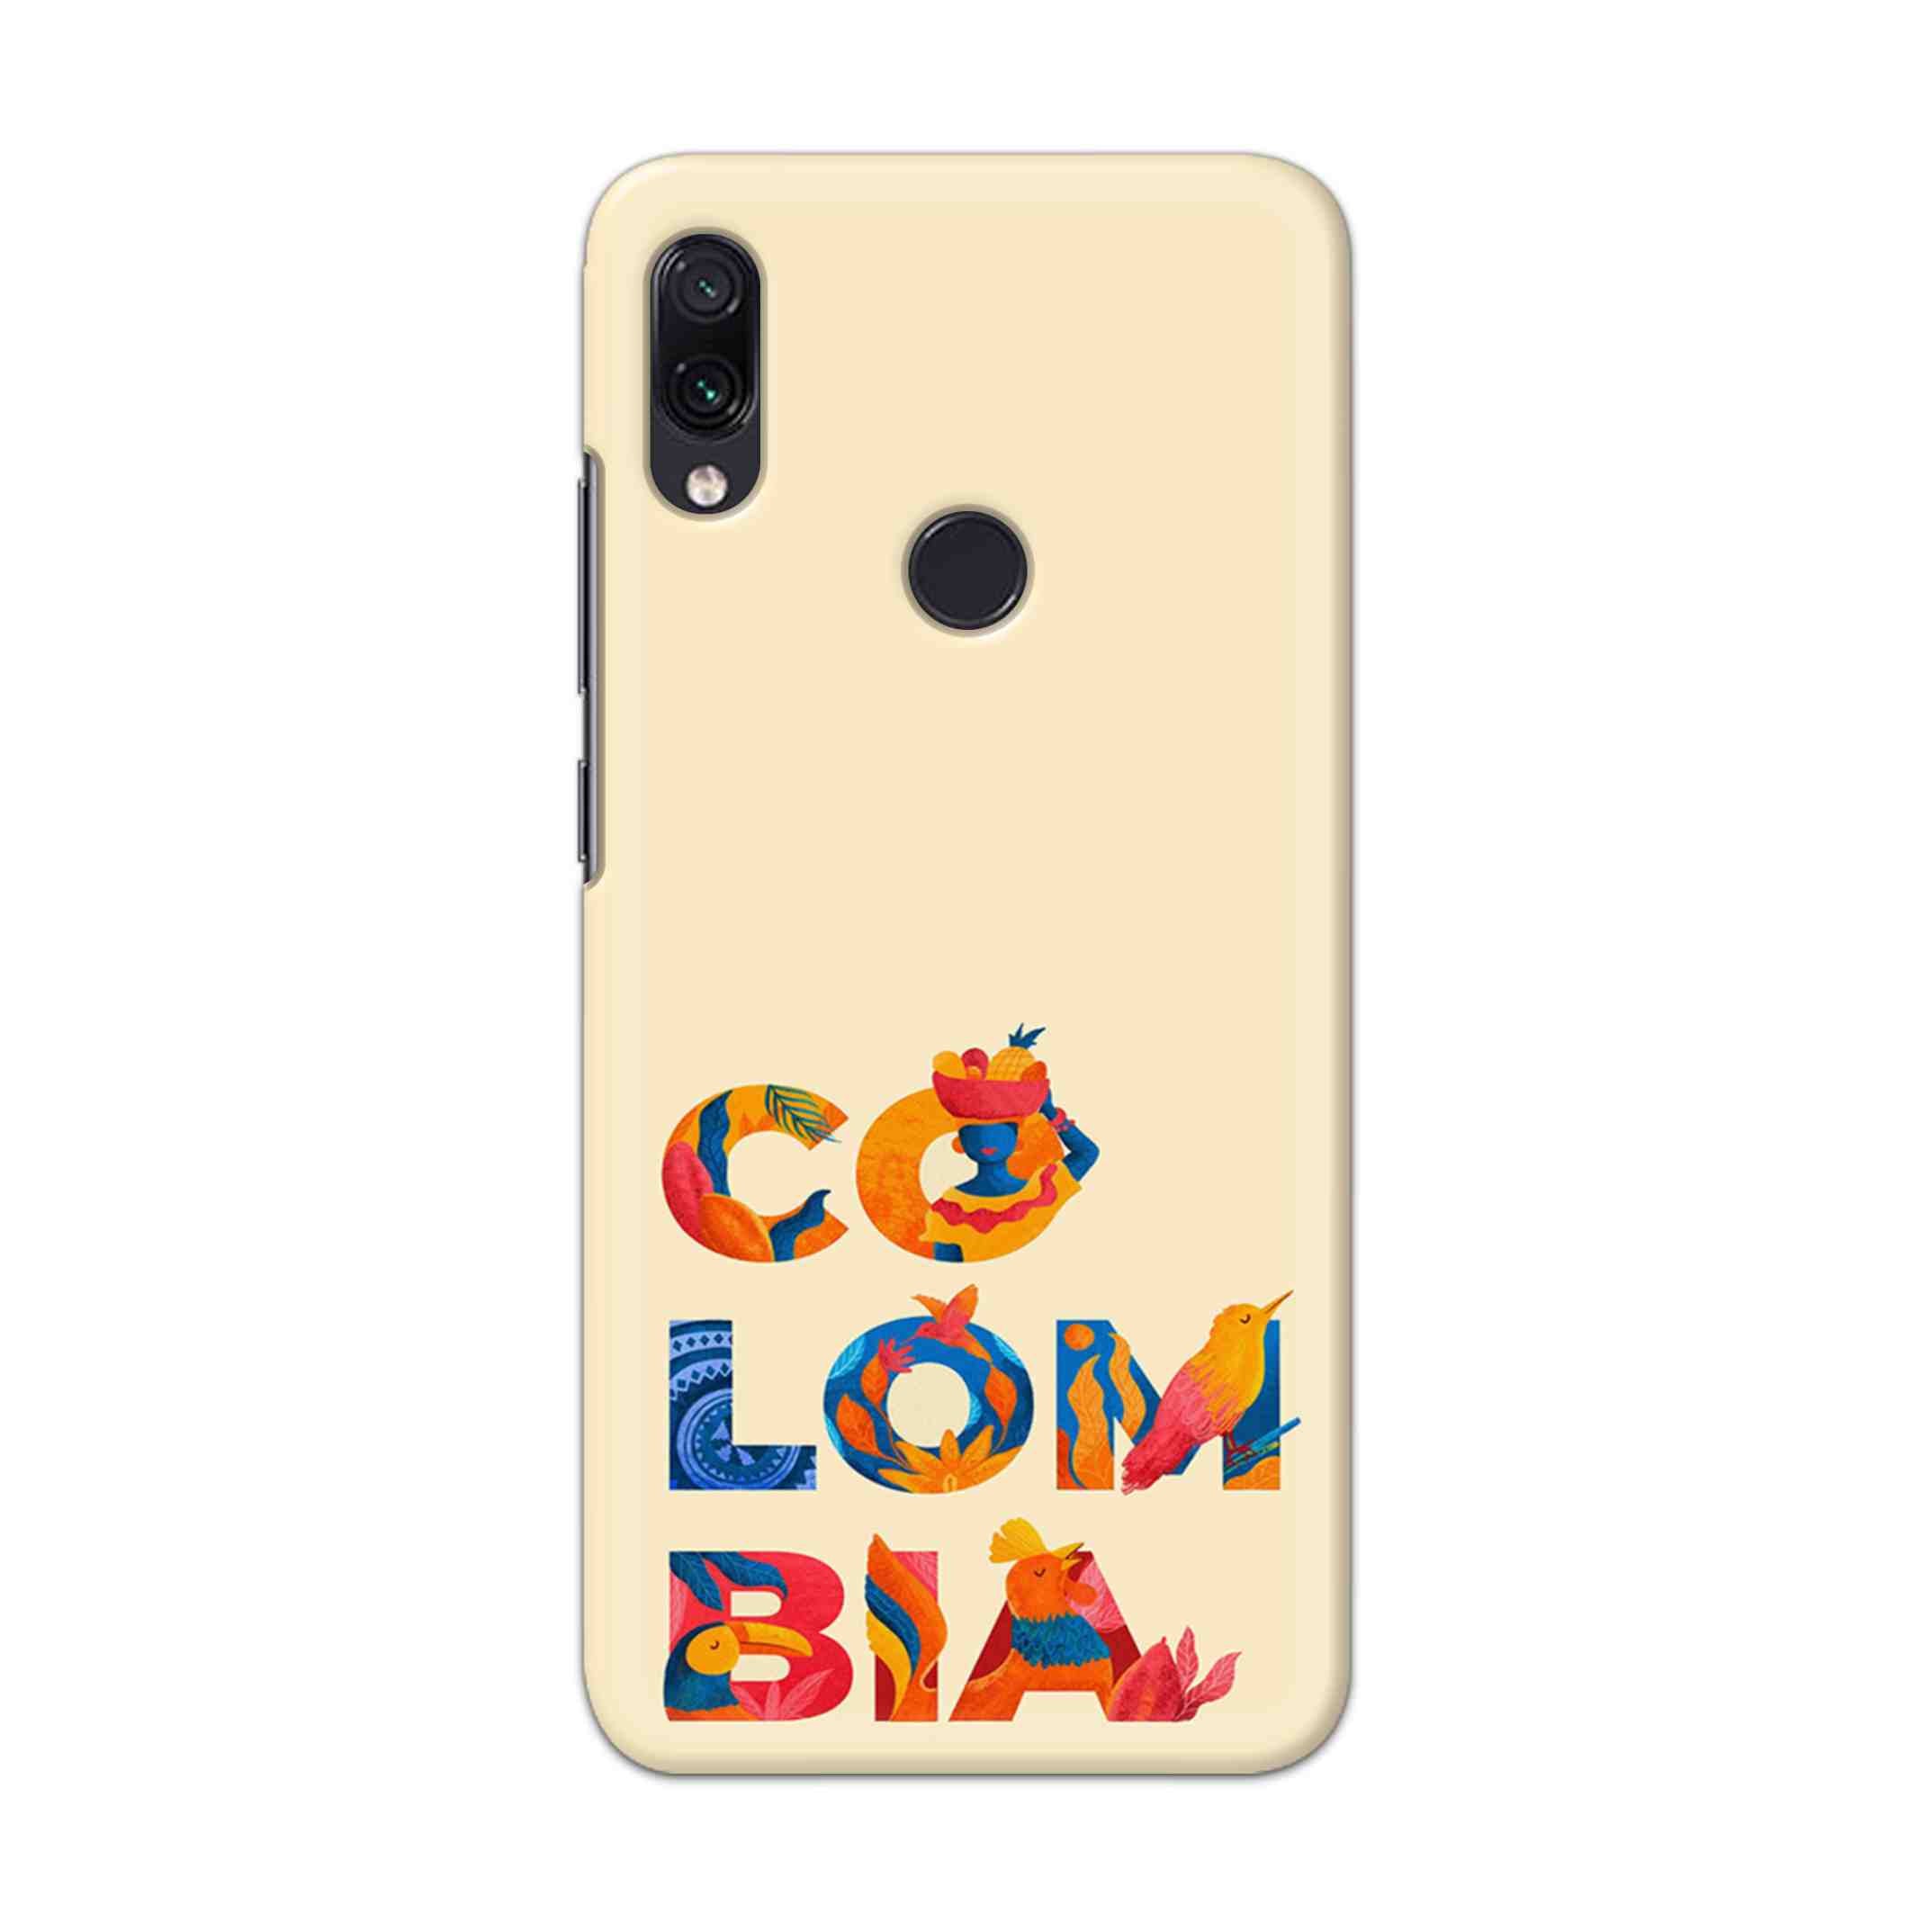 Buy Colombia Hard Back Mobile Phone Case Cover For Xiaomi Redmi 7 Online